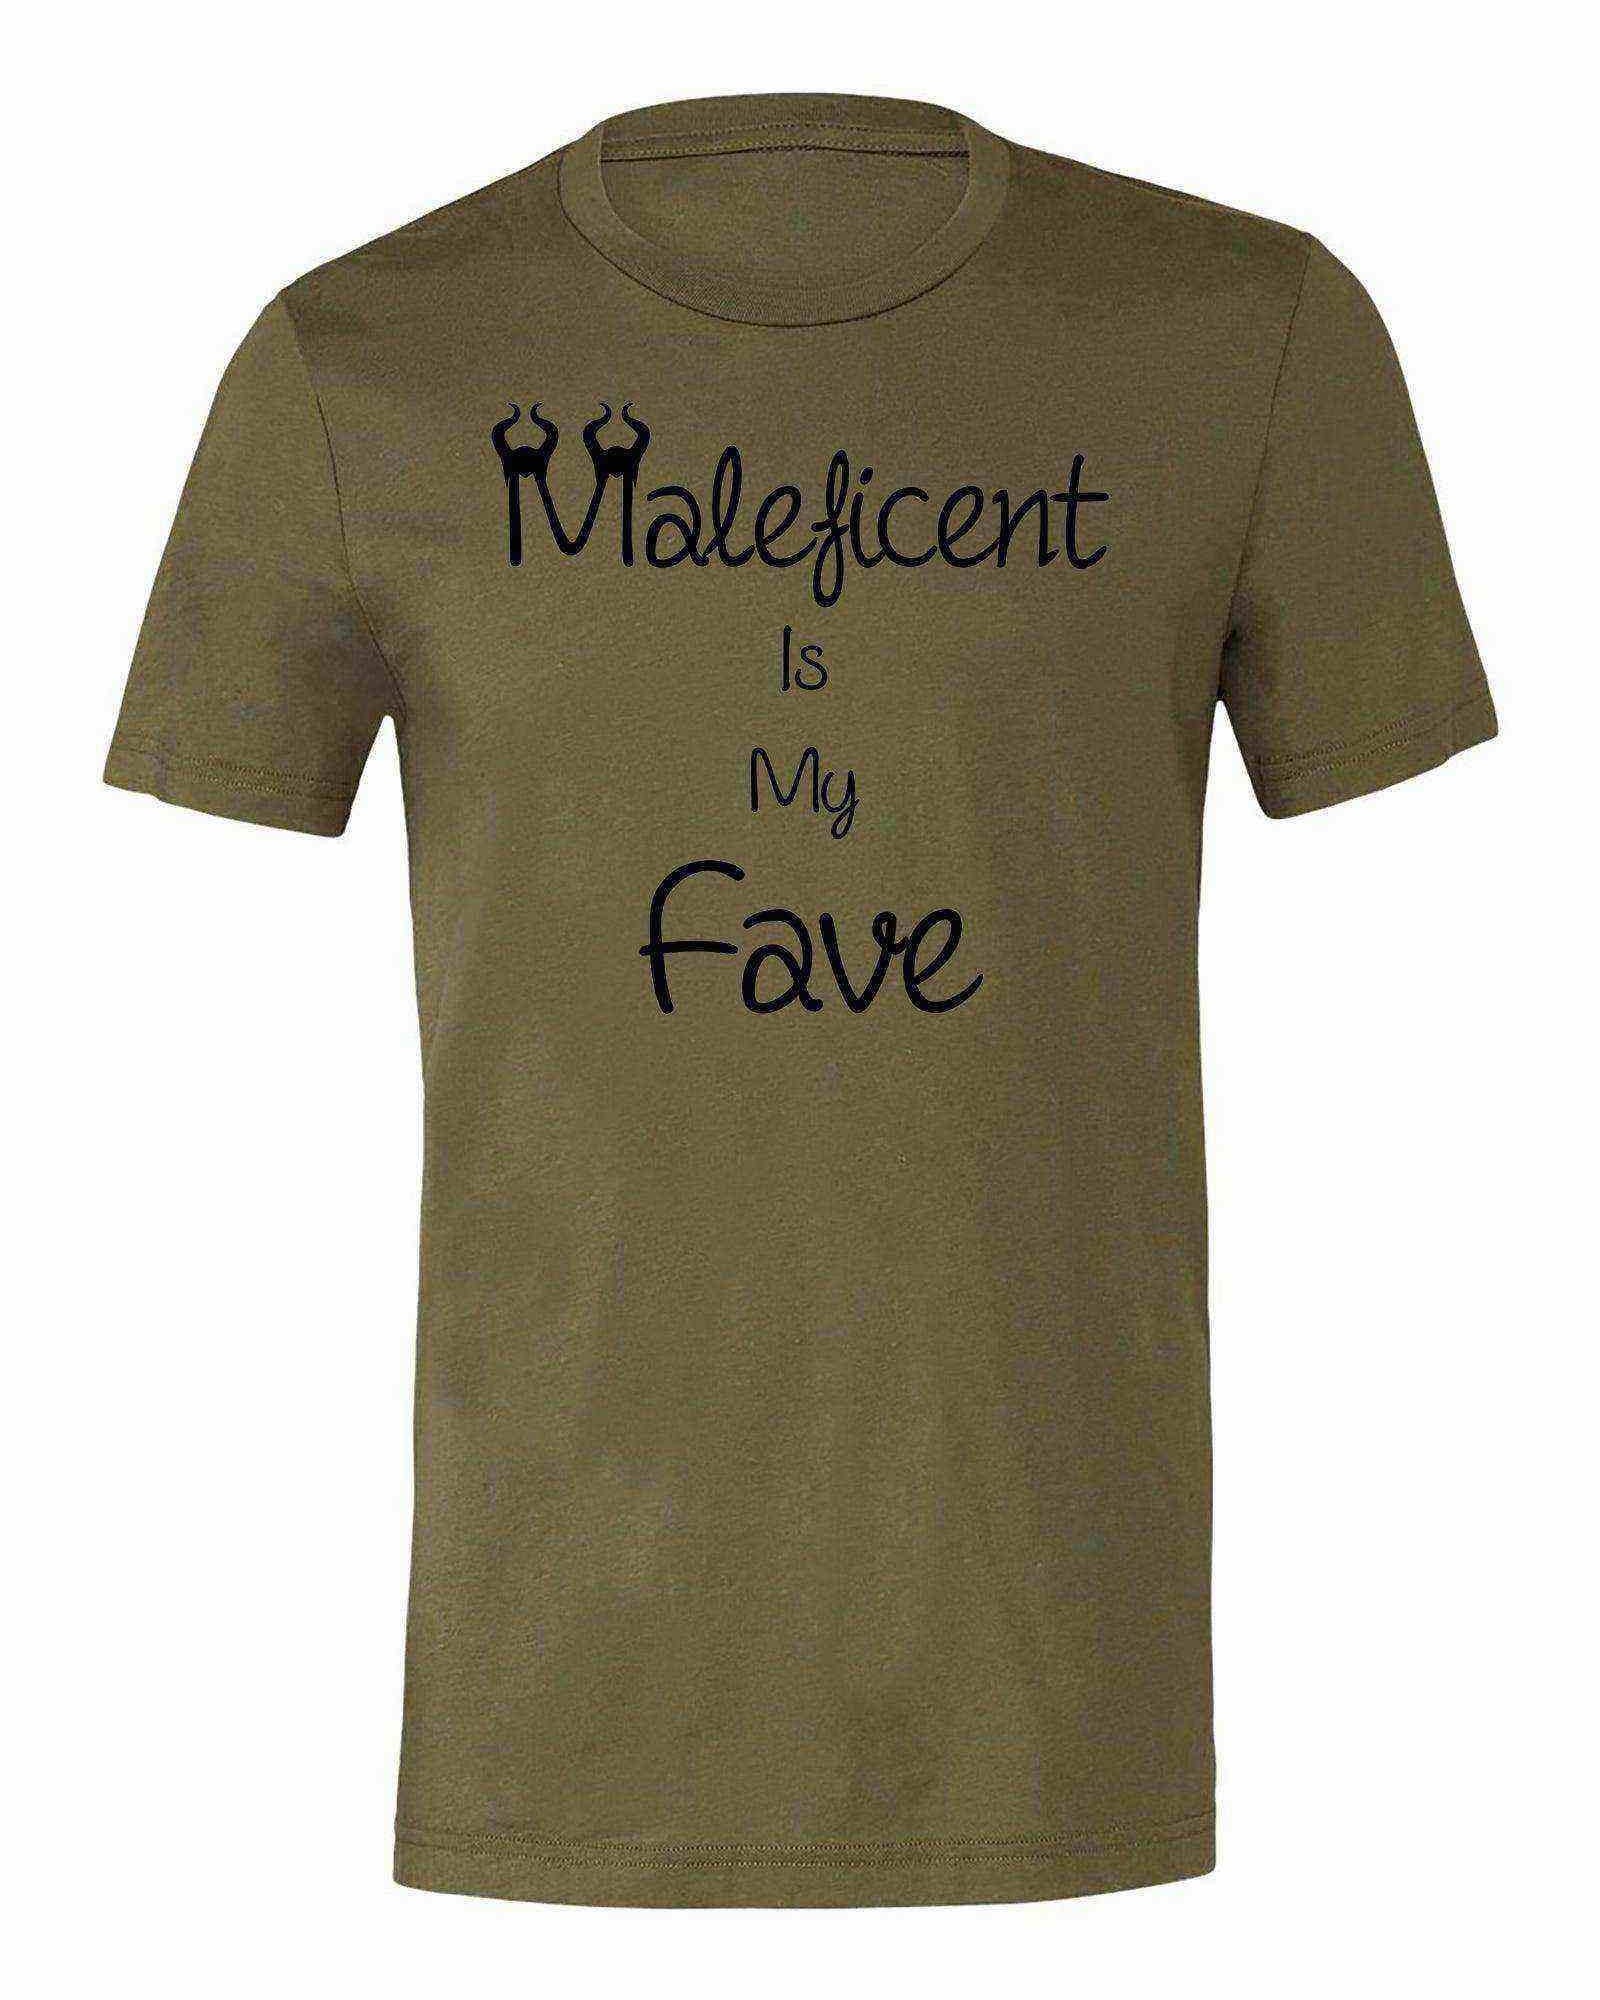 Toddler | Maleficent is my Fave Shirt - Dylan's Tees